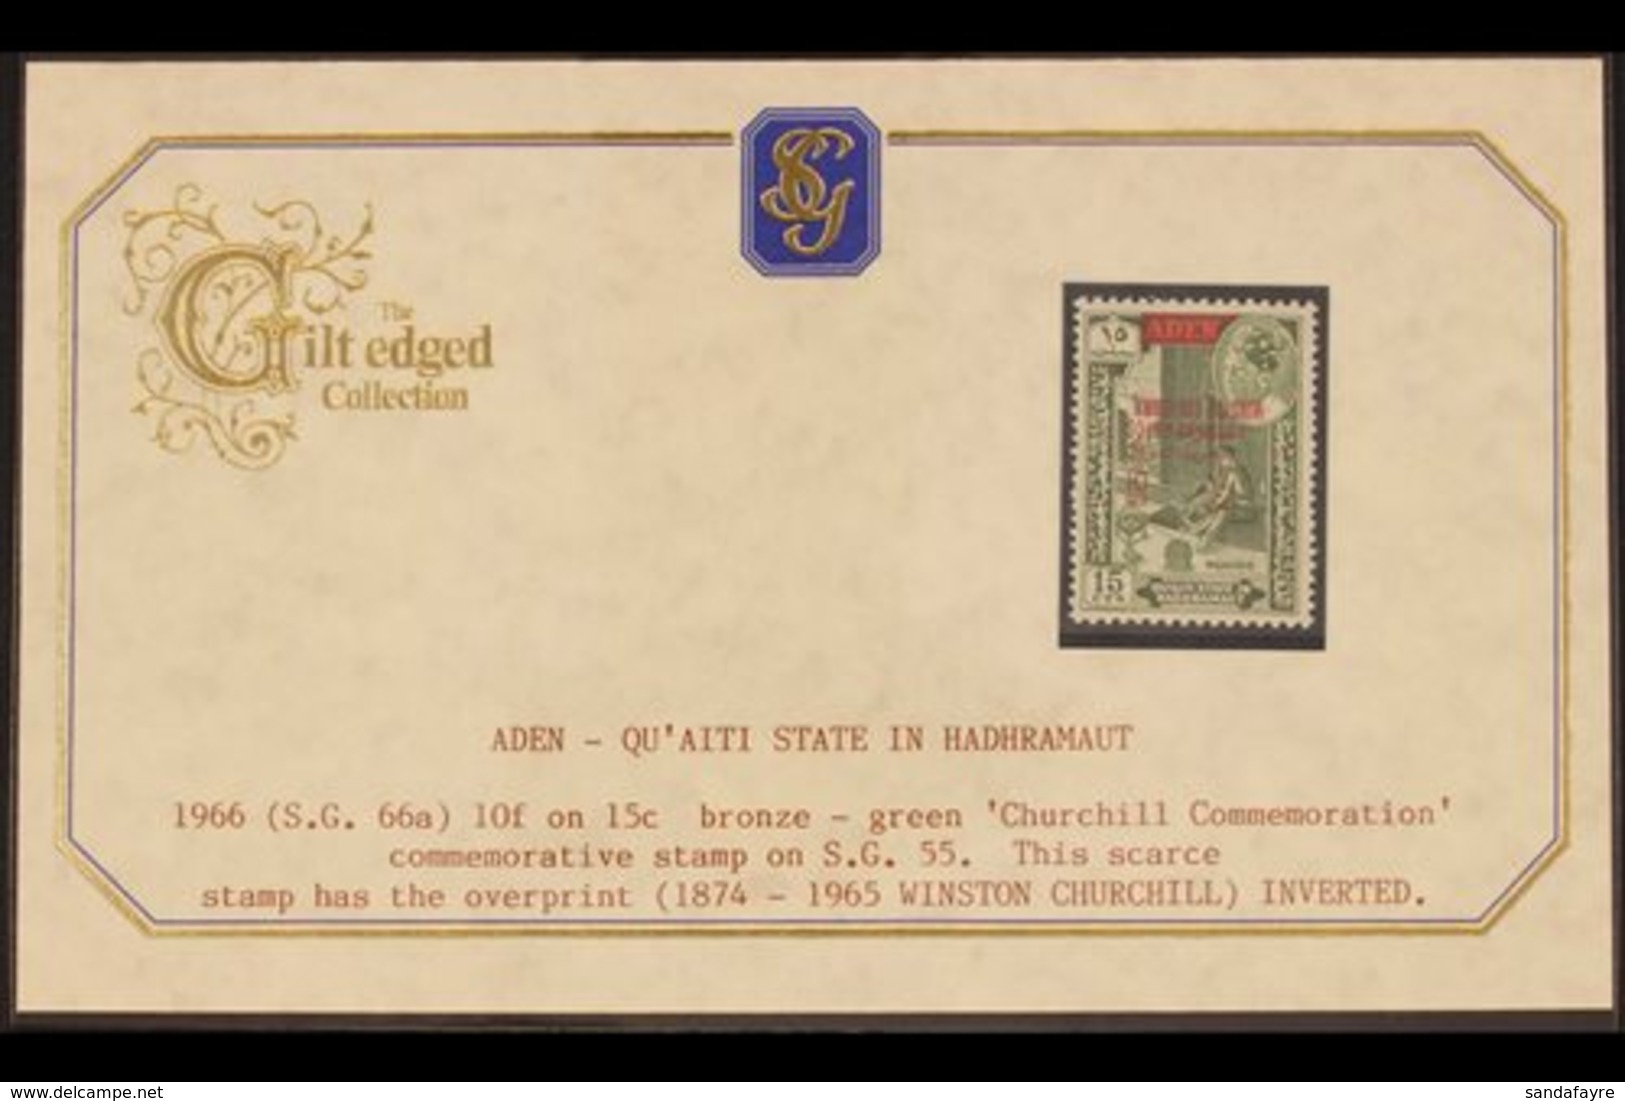 HADHRAMAUT 1966 10f On 15c Bronze Green "Winston Churchill" INVERTED OVERPRINT Variety, SG 66a, Never Hinged Mint. For M - Aden (1854-1963)